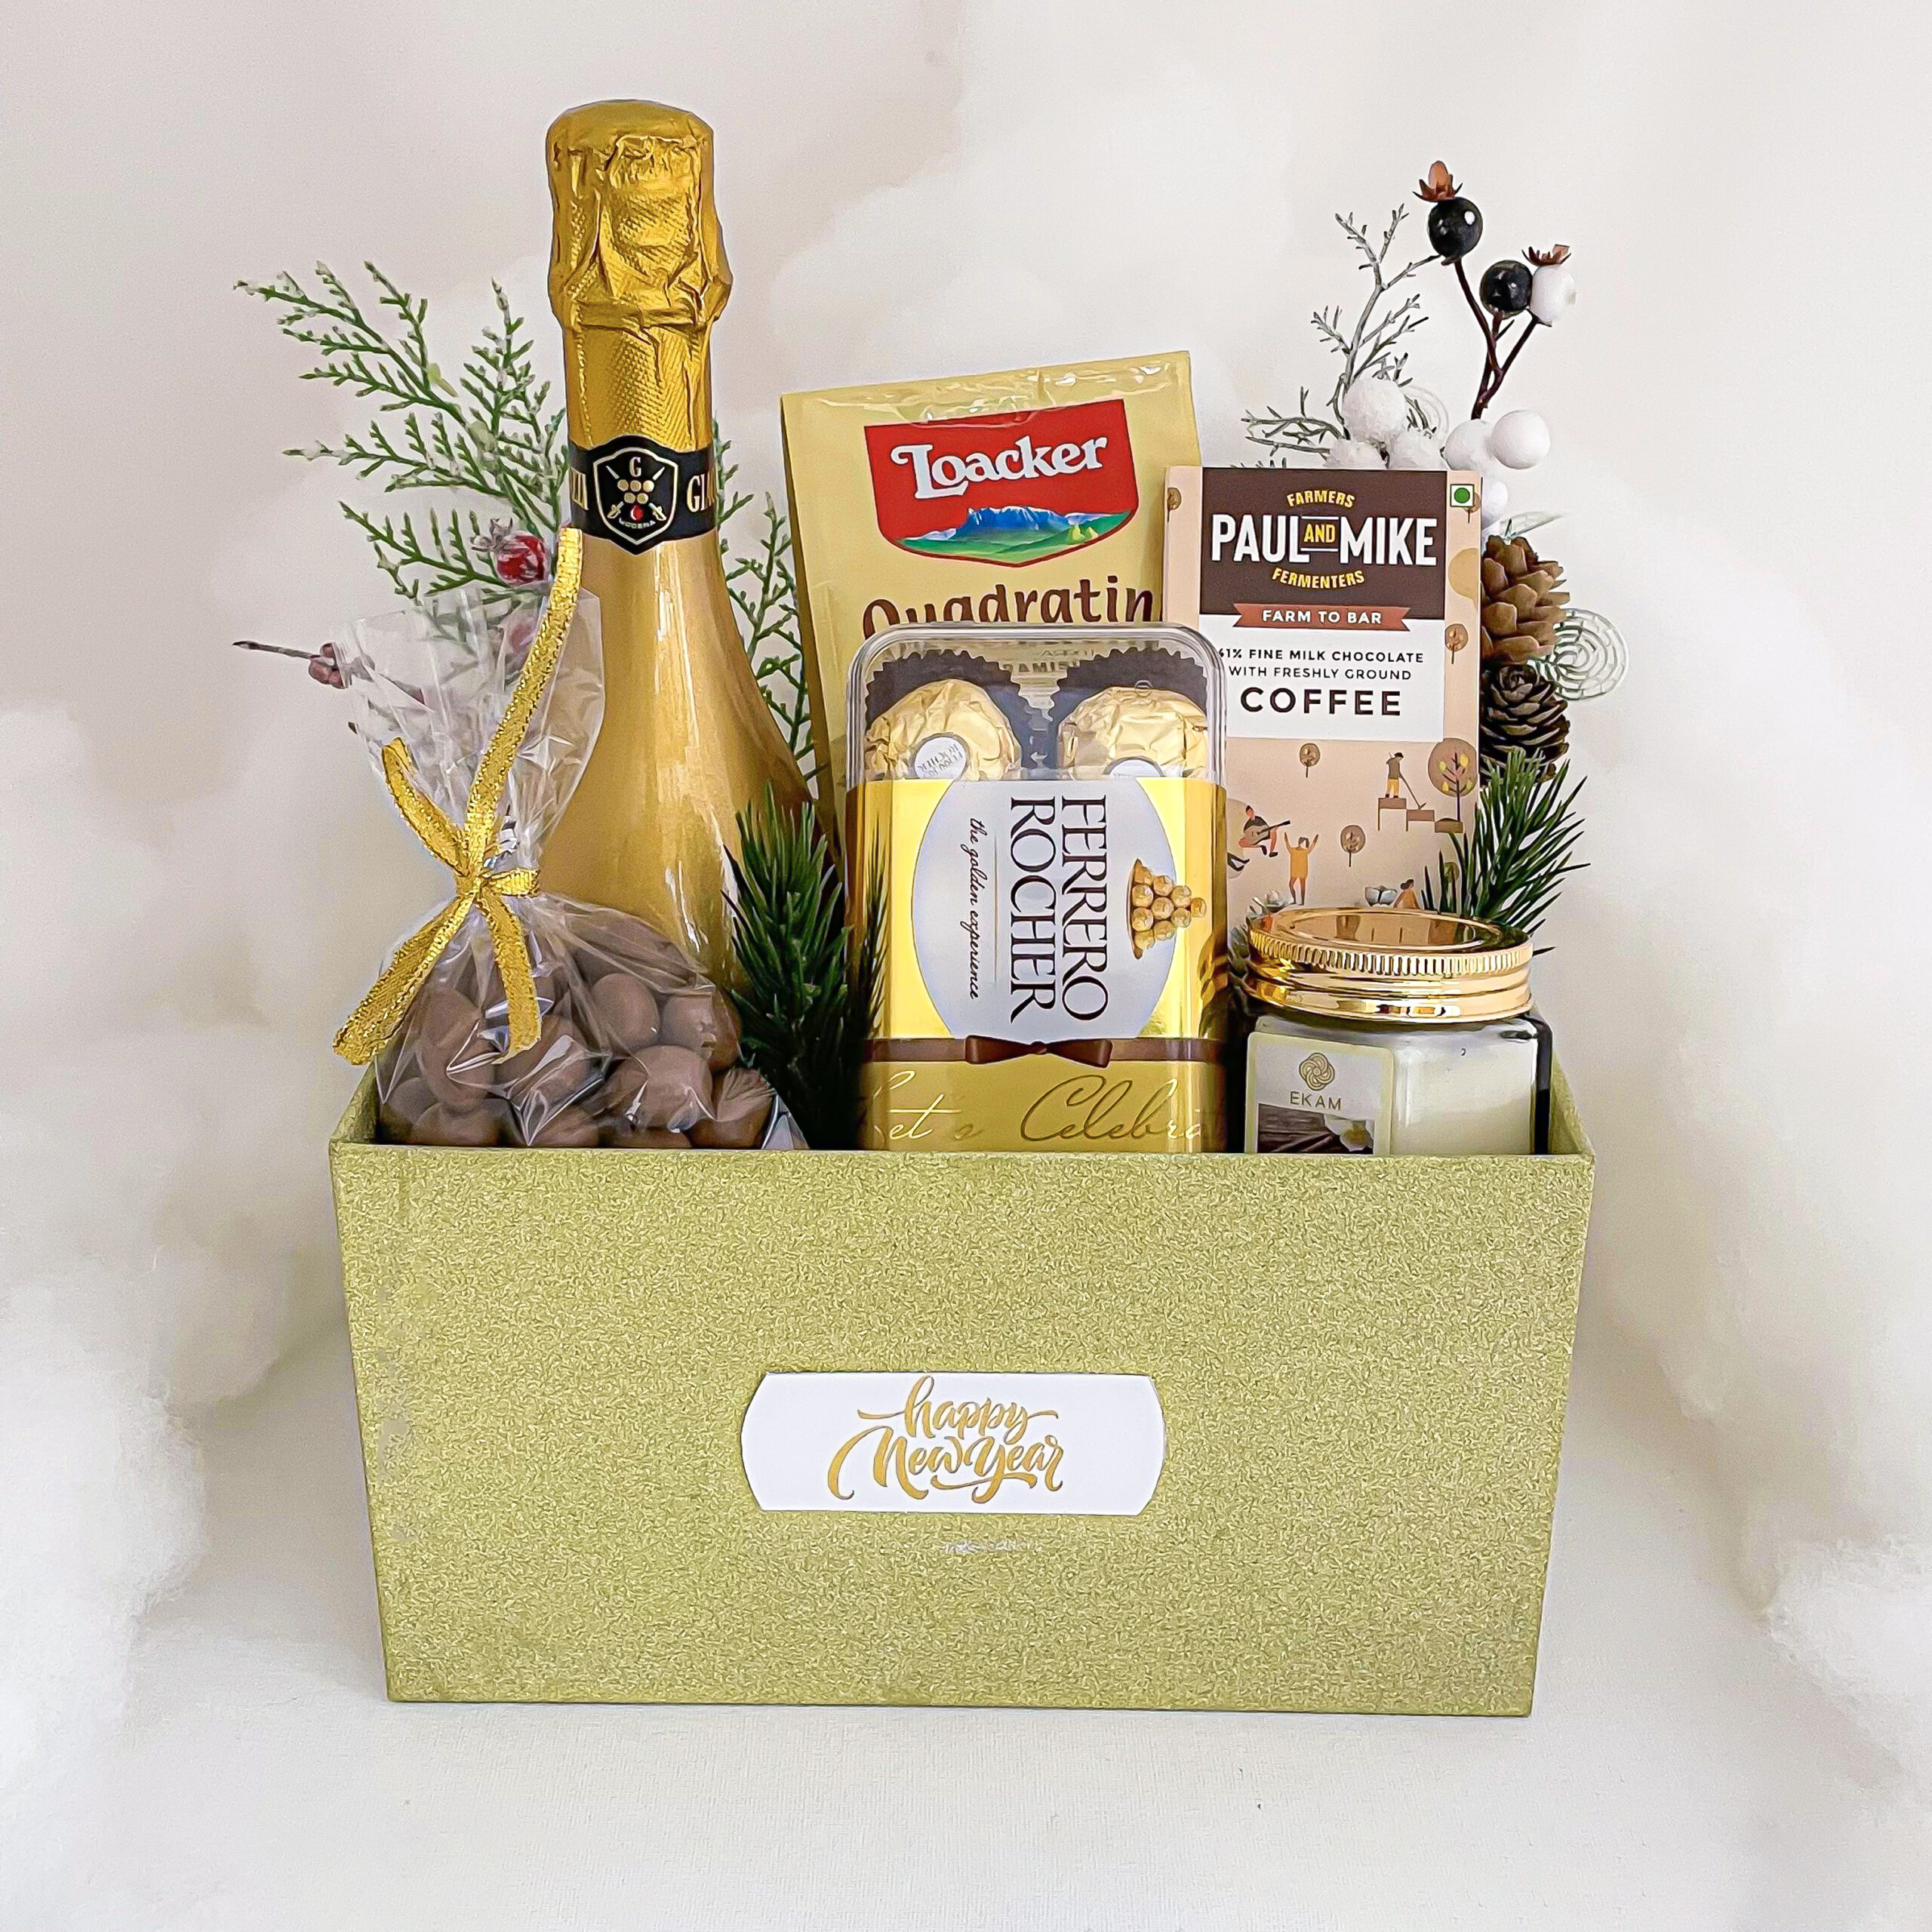 Festive Easter gift hamper with premium chocolates, chocolate coated dry fruits, wine and more